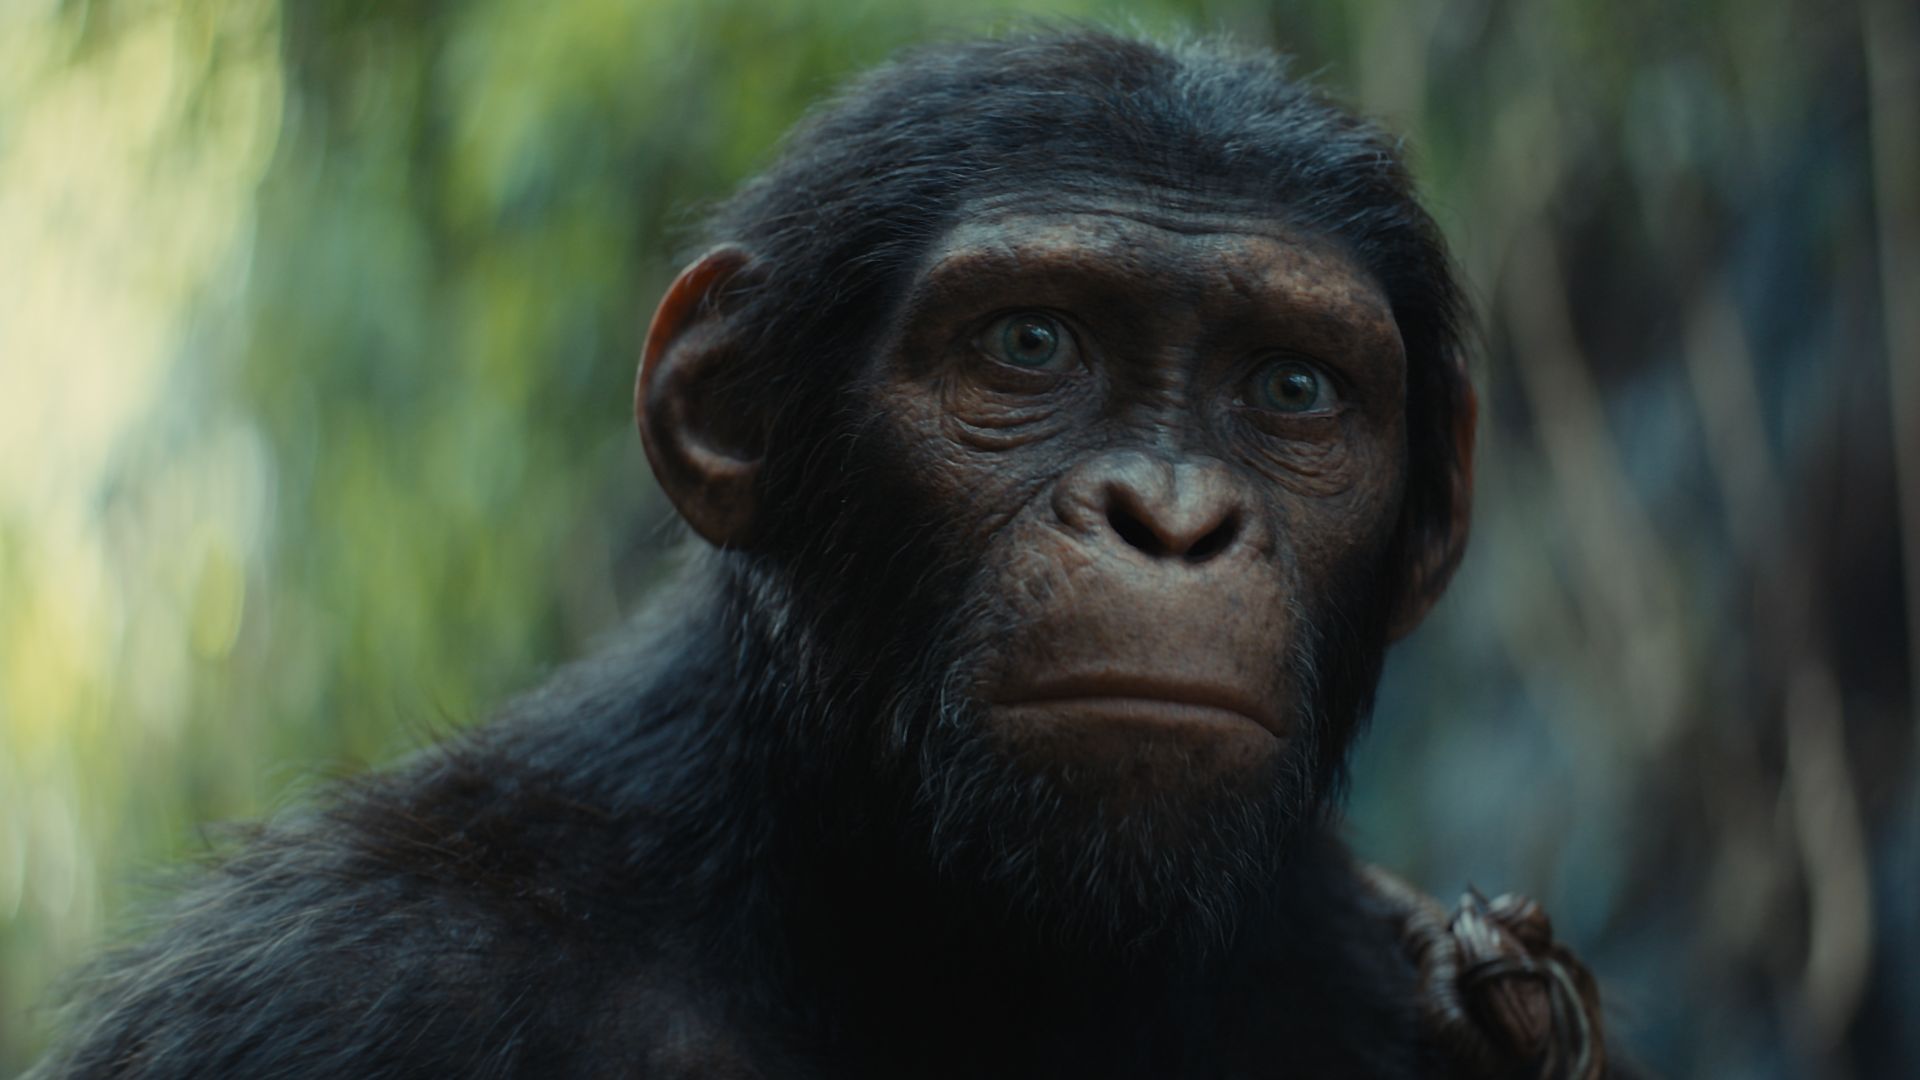 Kingdom of the Planet of the Apes director would like to see the series build to the 1968 original - but hopes we never see a remake